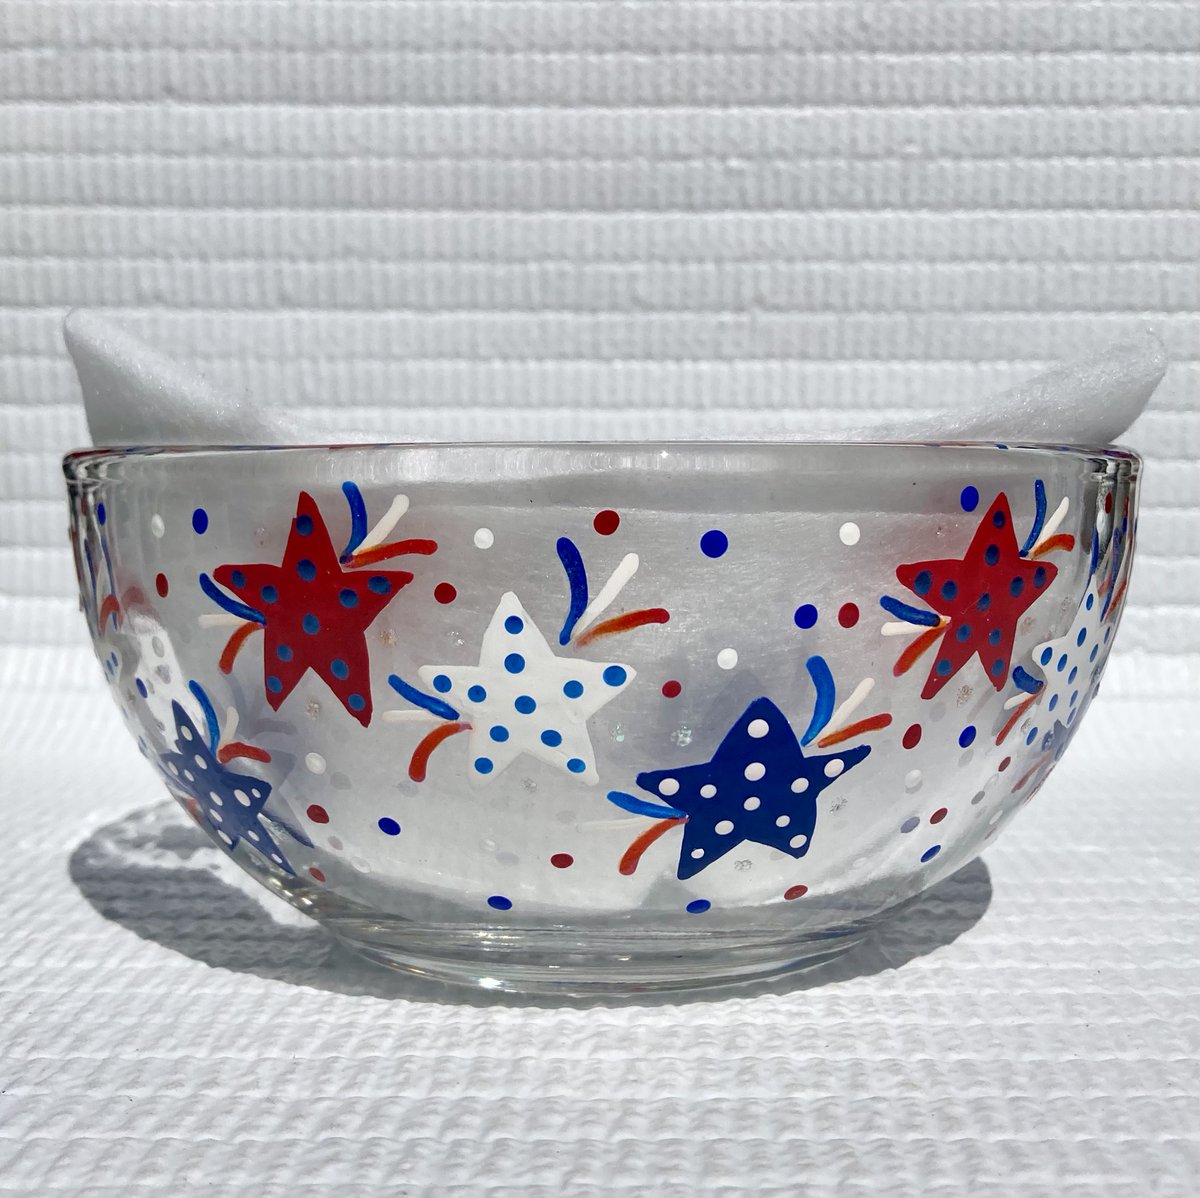 Check out this Summer candy dish etsy.com/listing/172217… #summercandydish #summerdecor #starcandydish #SMILEtt23 #CraftBizParty #patrioticbowl #etsy #etsyshop #starbowl #4thofjuly